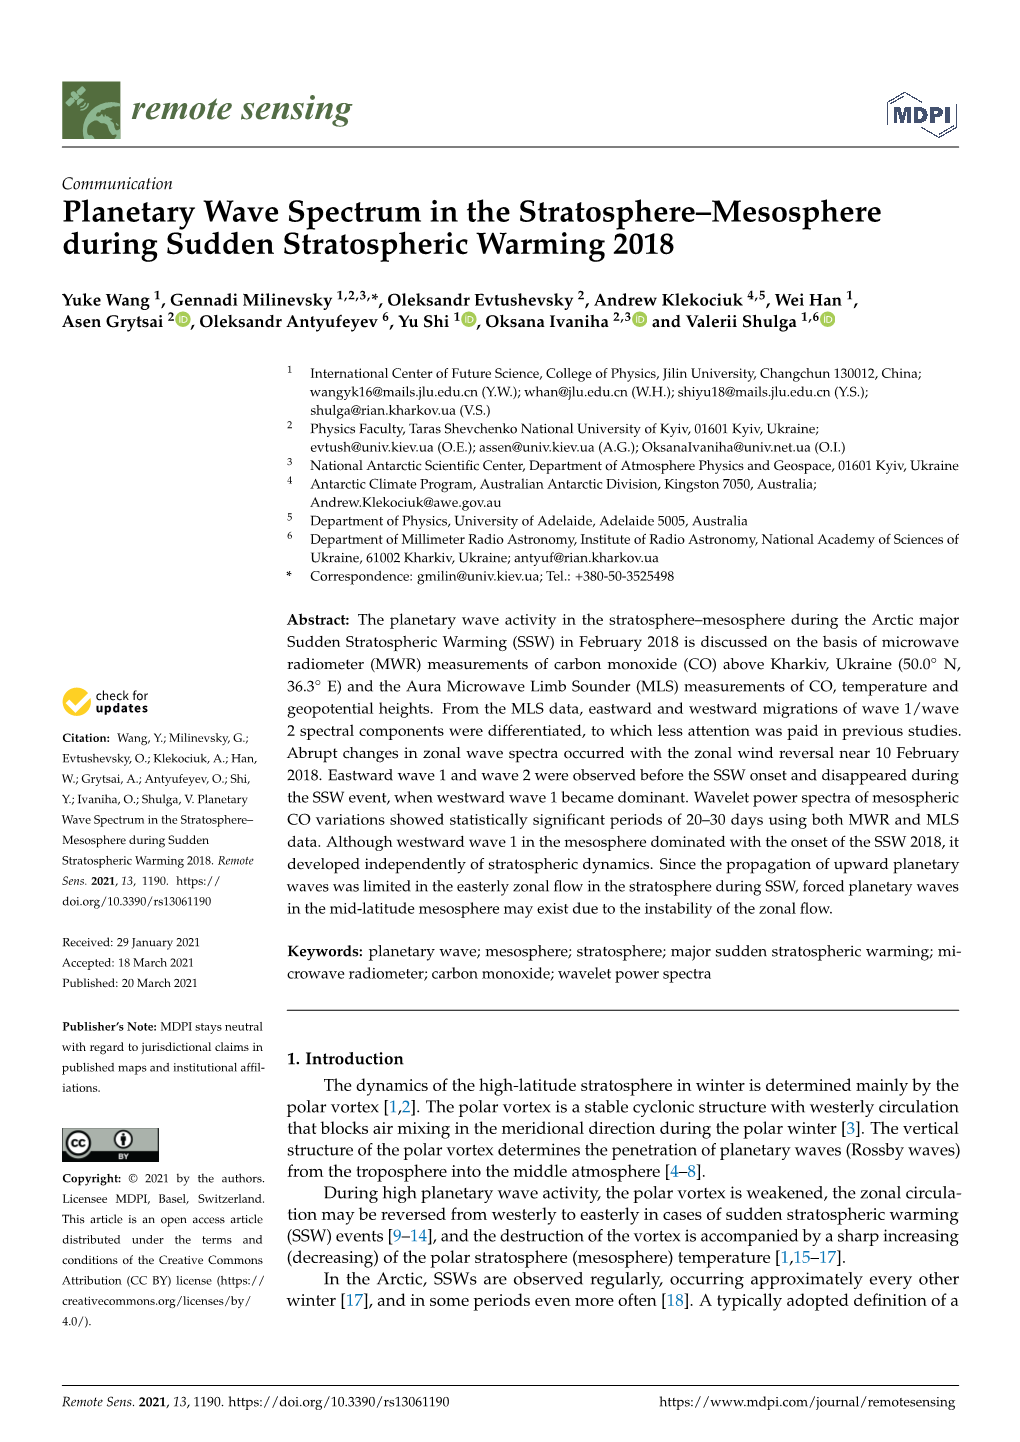 Planetary Wave Spectrum in the Stratosphere–Mesosphere During Sudden Stratospheric Warming 2018